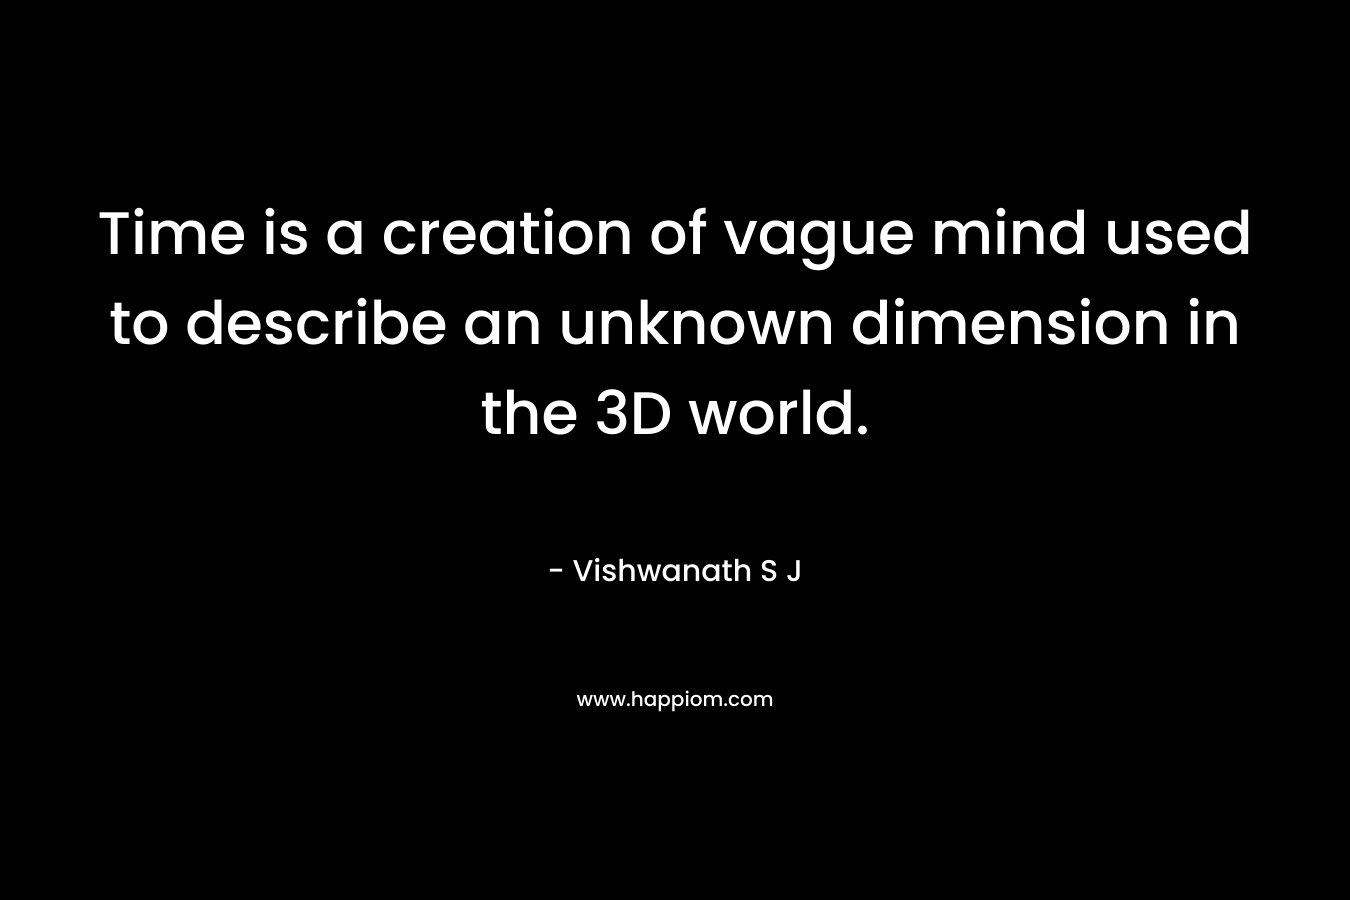 Time is a creation of vague mind used to describe an unknown dimension in the 3D world.